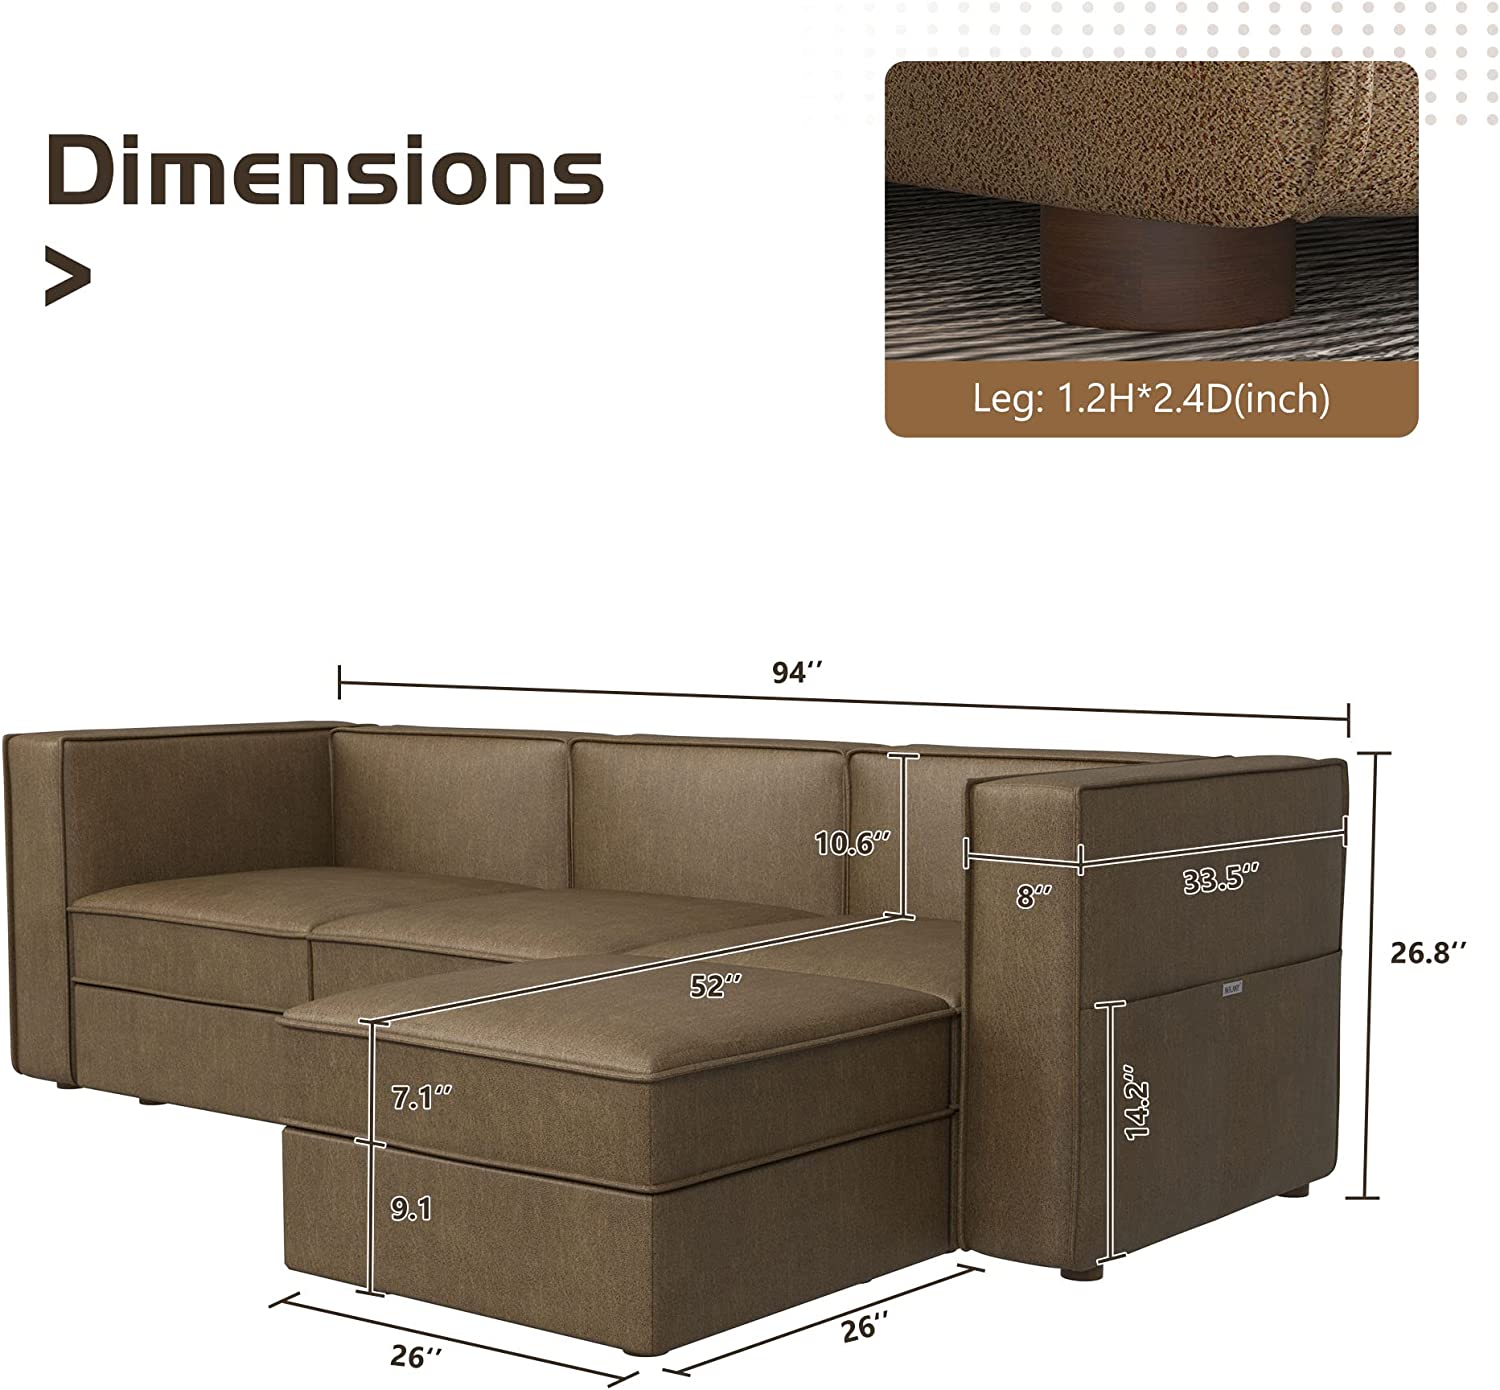 Modular and Convertible Sectional Sofa with Storage Seats